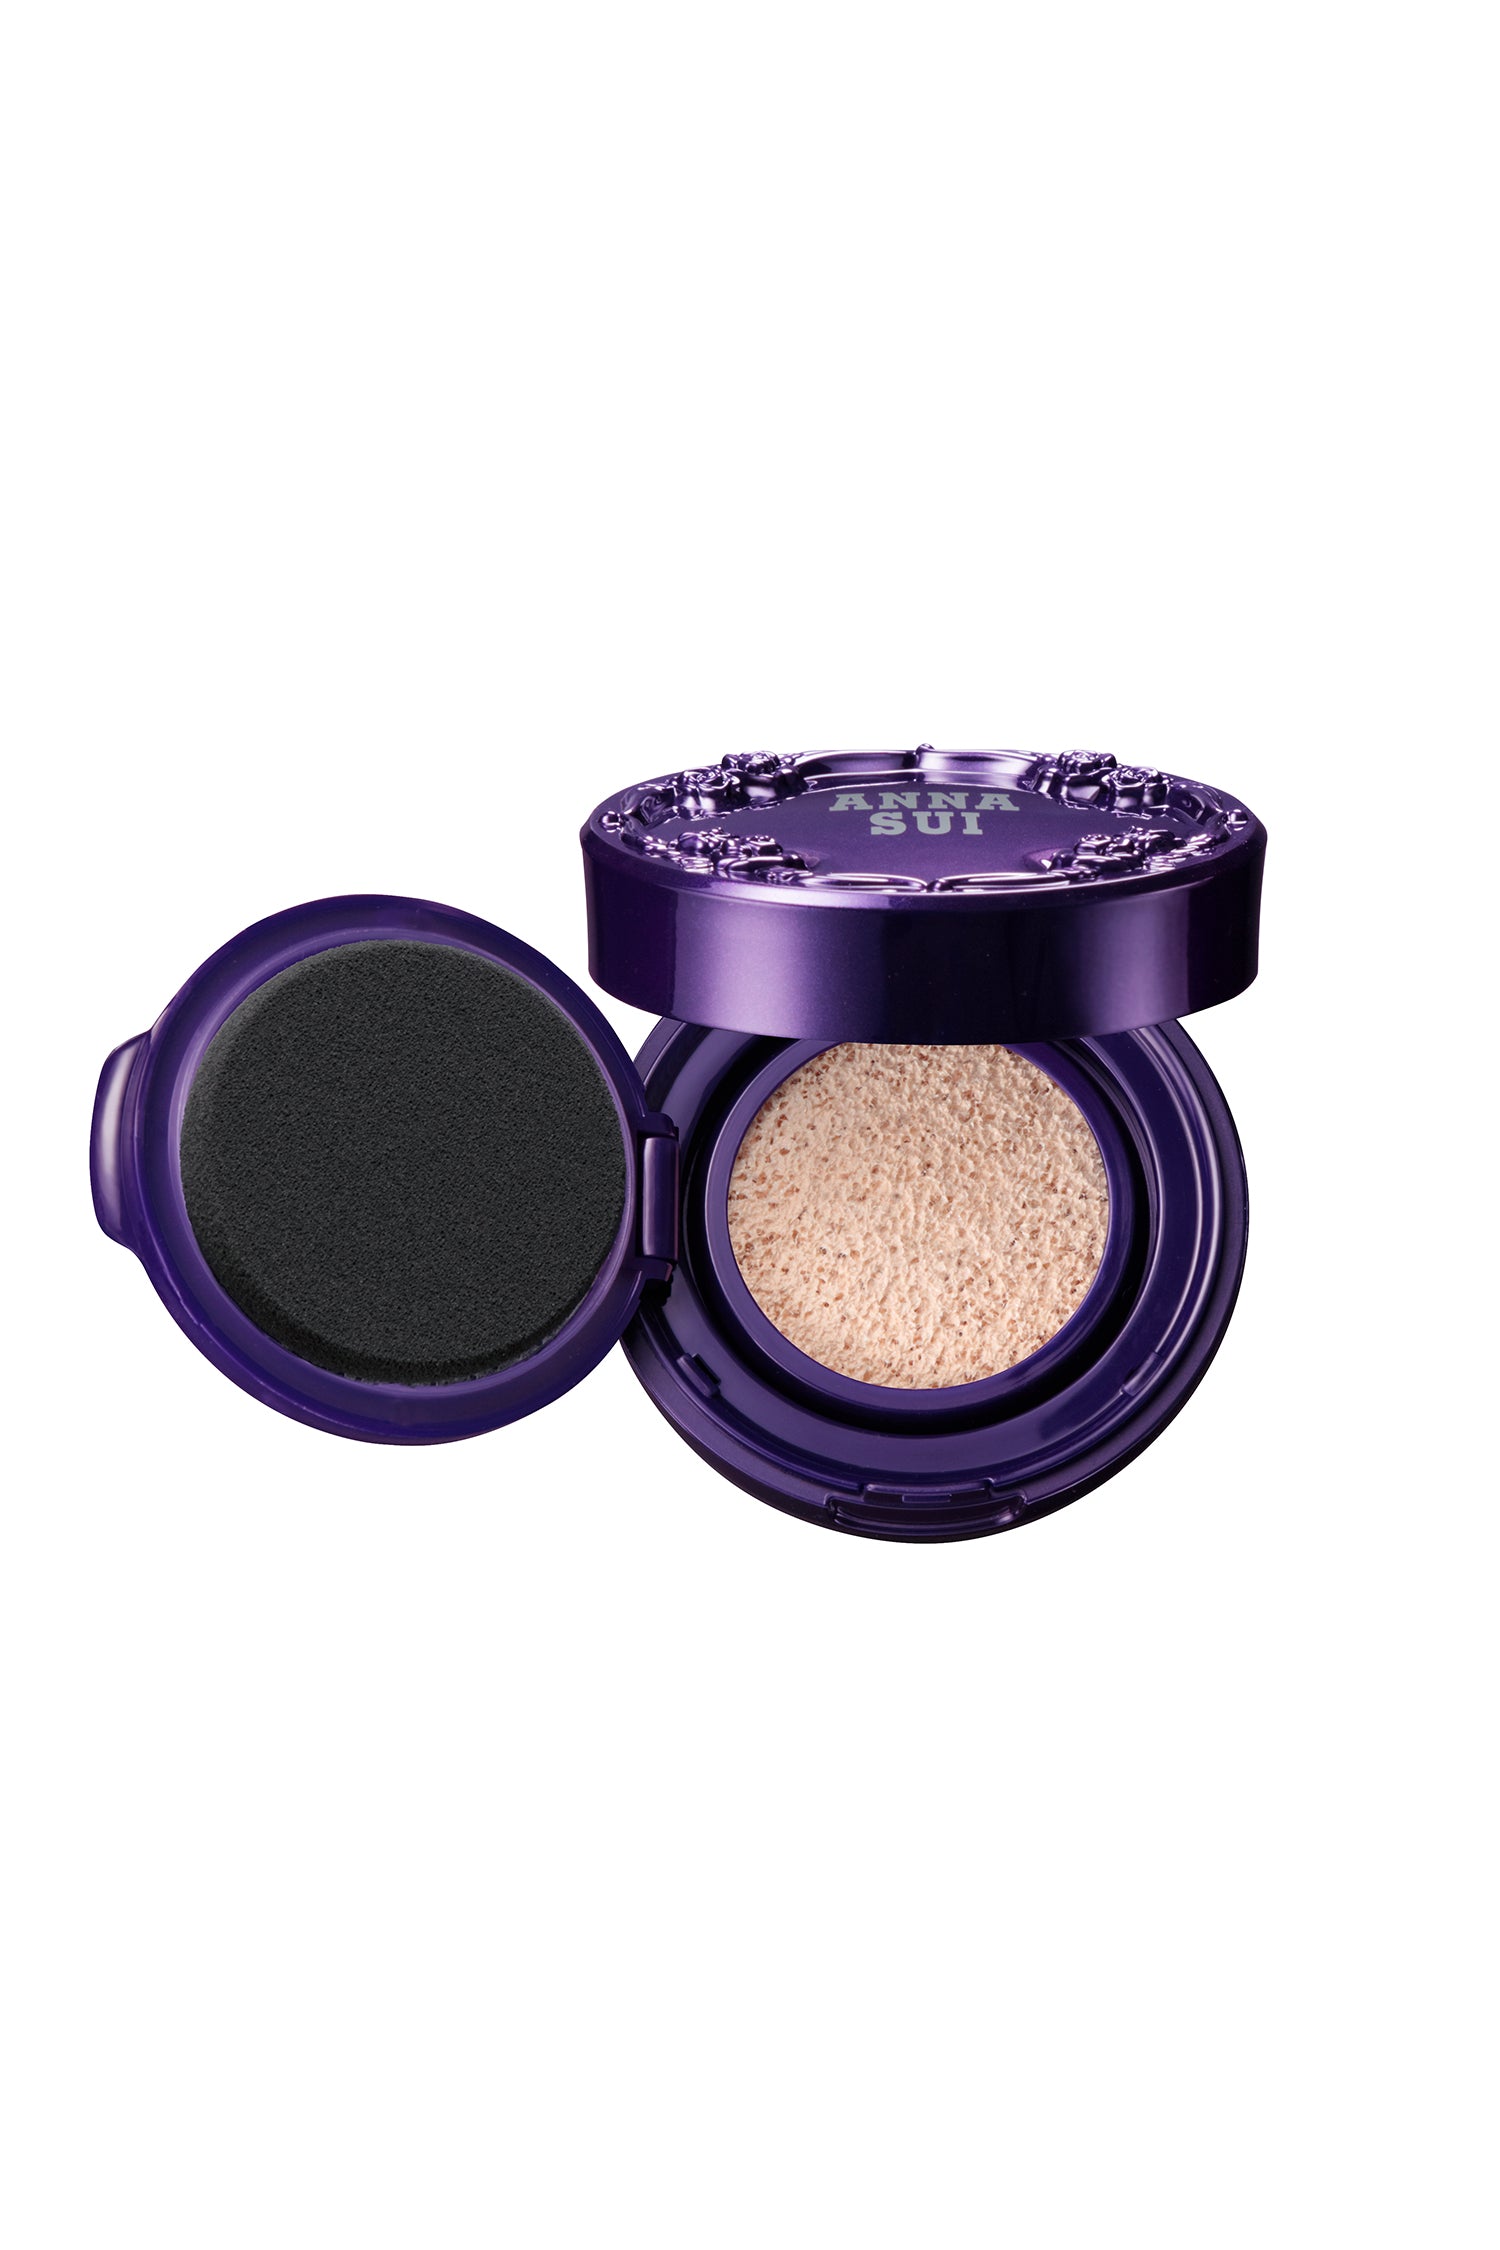 Purple round case, raised rose pattern & Anna Sui label, face powder, open lid with a cushion